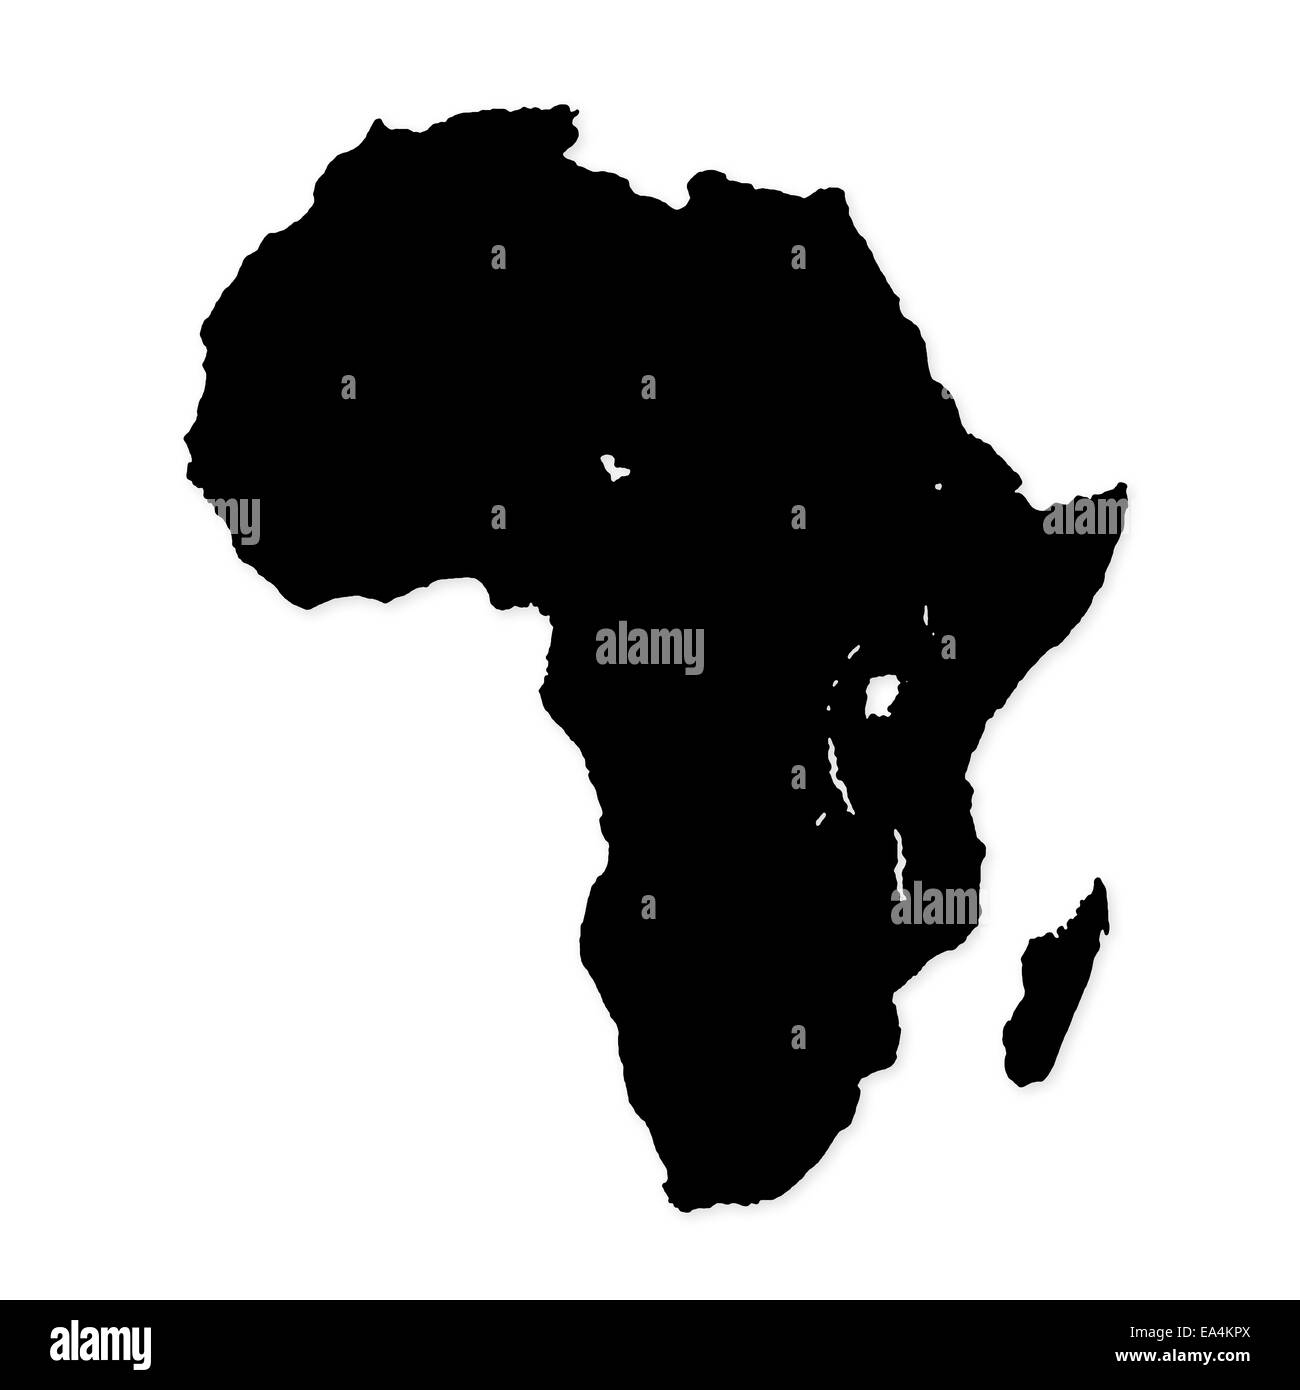 Africa Map Black And White Stock Photos Images Alamy